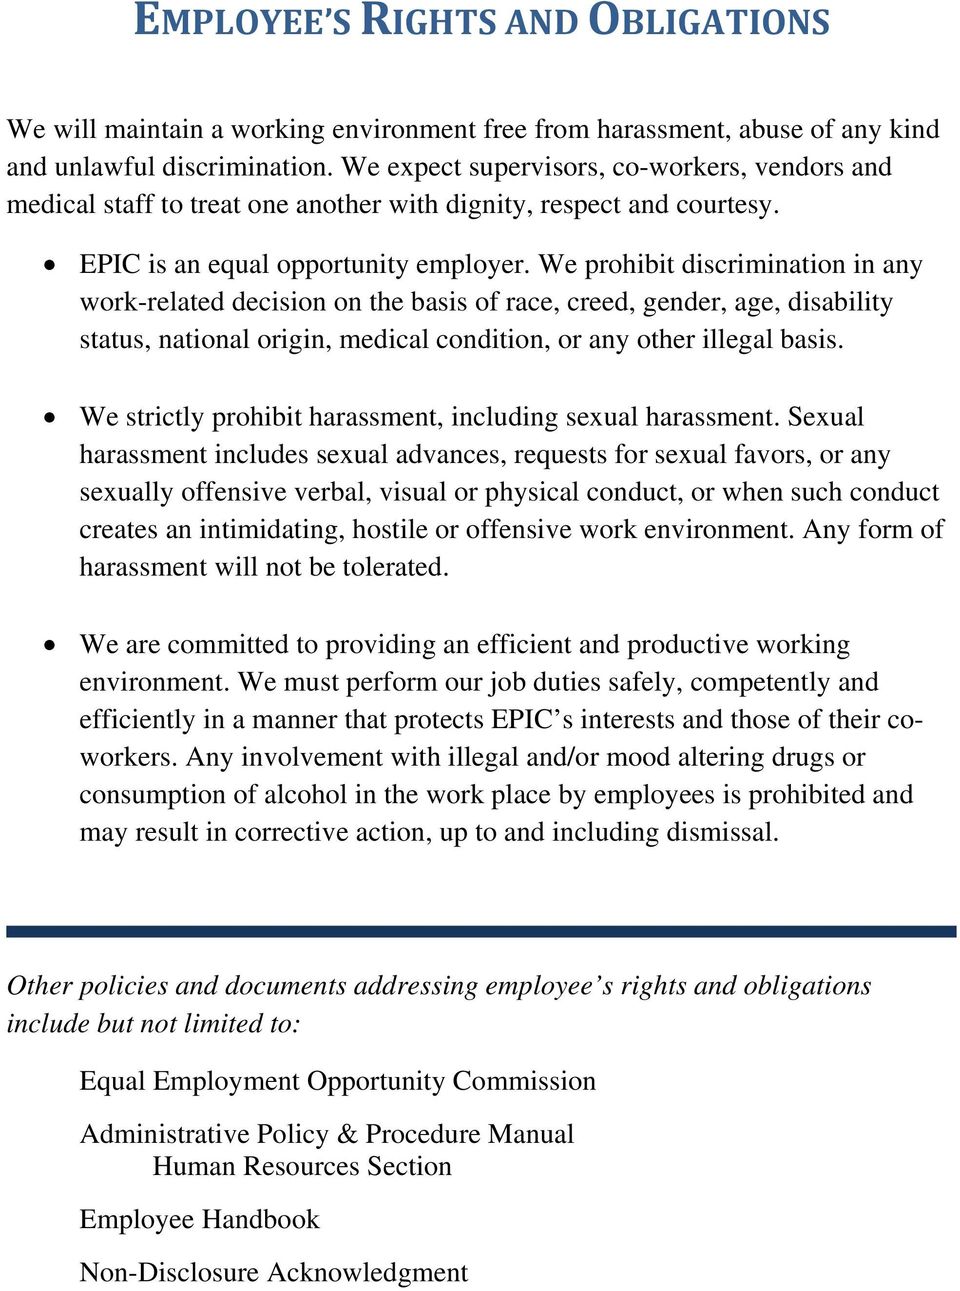 We prohibit discrimination in any work-related decision on the basis of race, creed, gender, age, disability status, national origin, medical condition, or any other illegal basis.